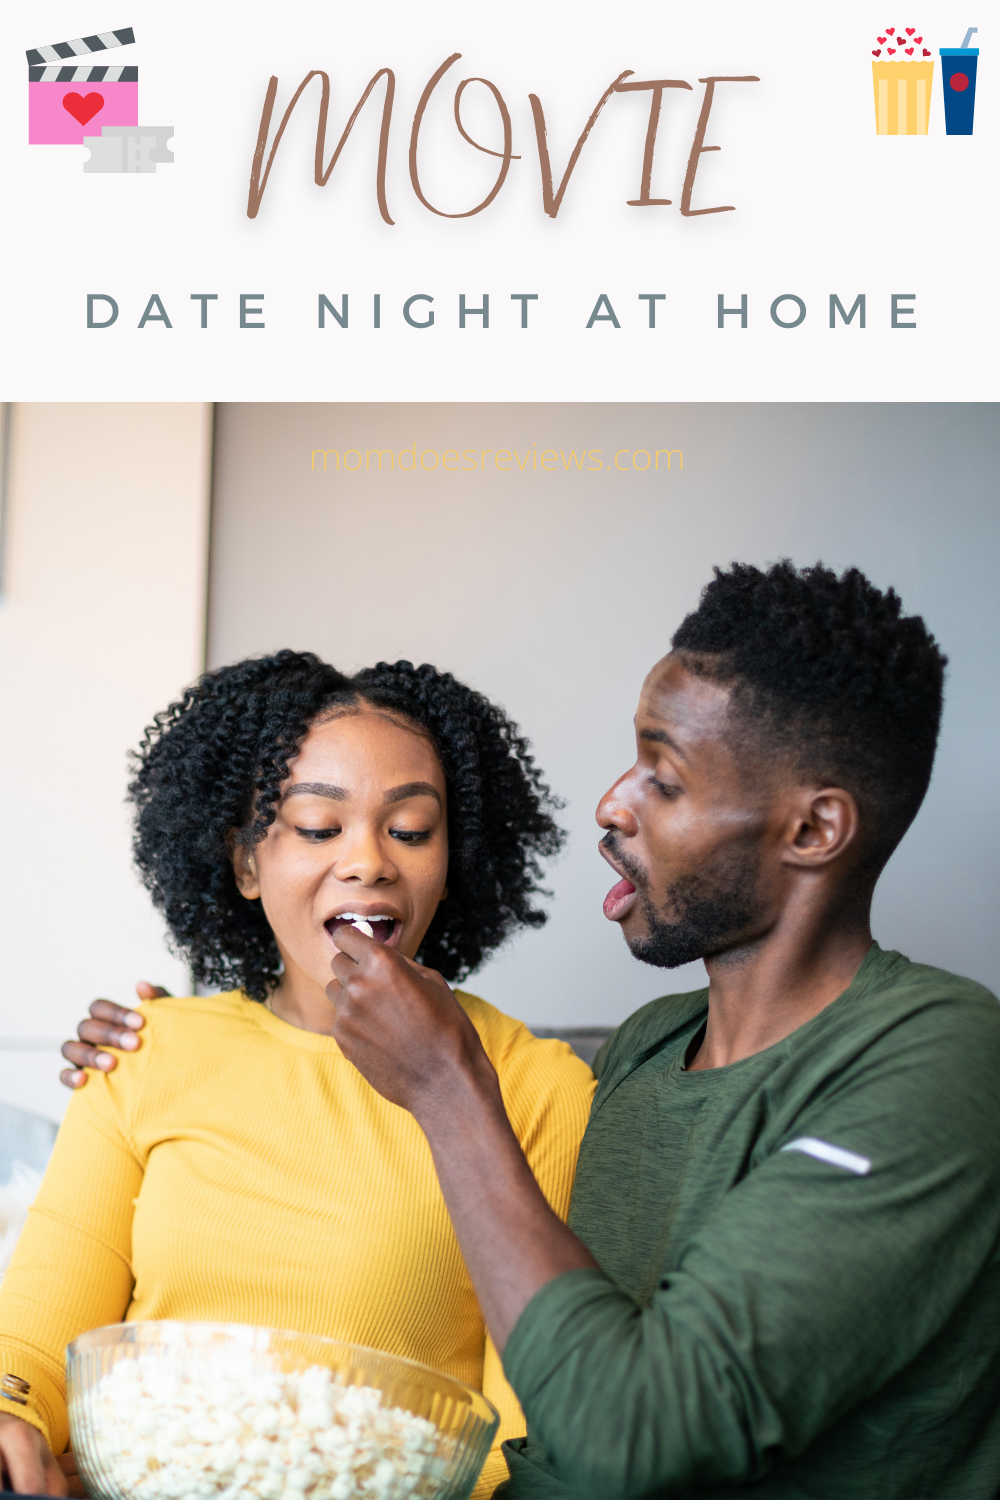 Ideas for a Movie Date at Home